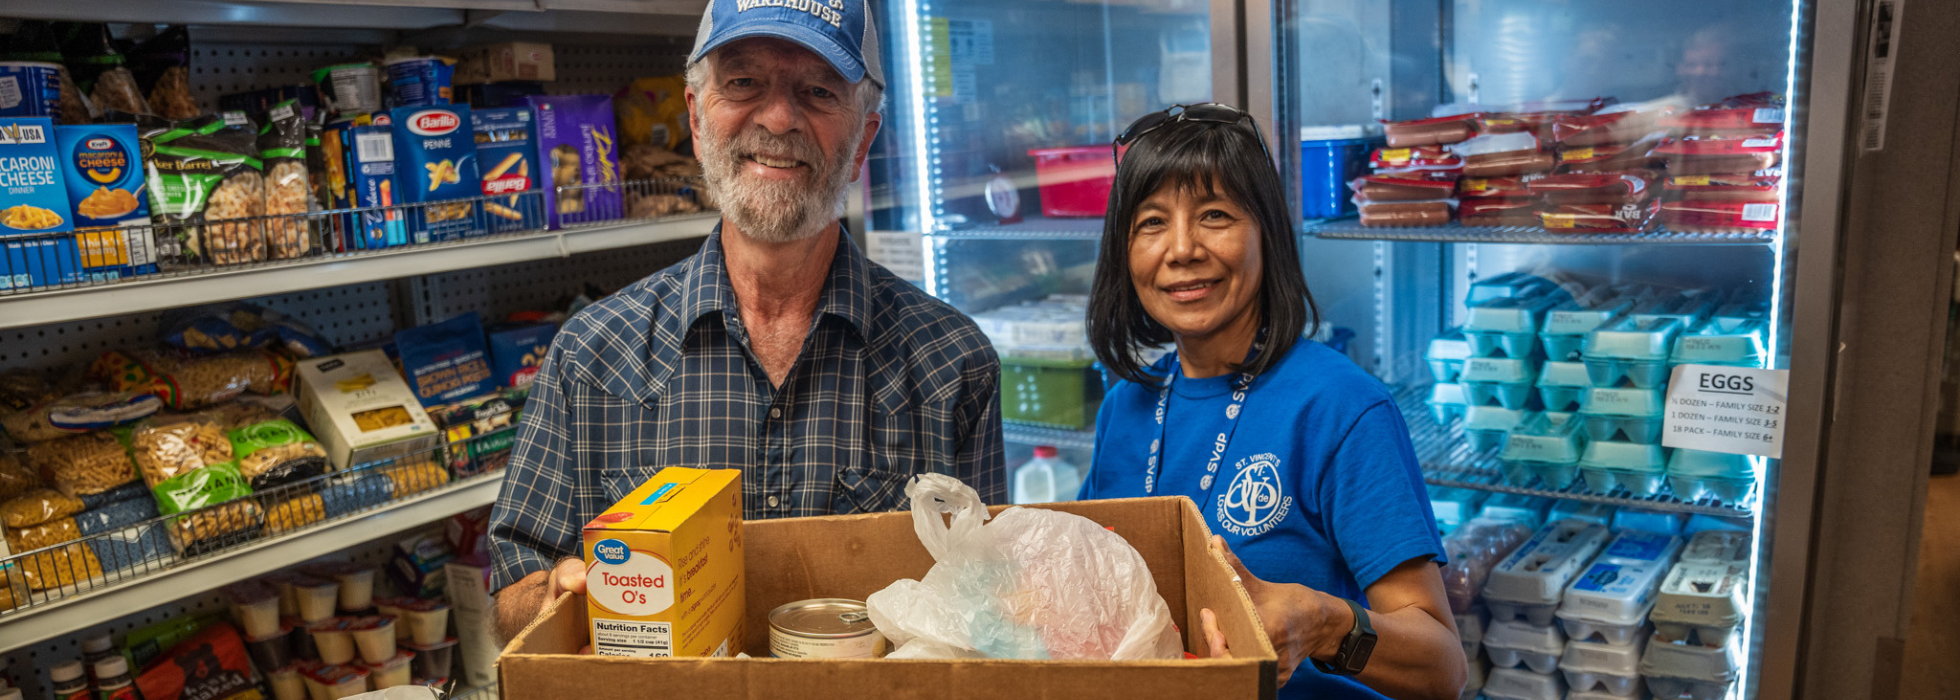 Man and woman holding a food box in a food pantry